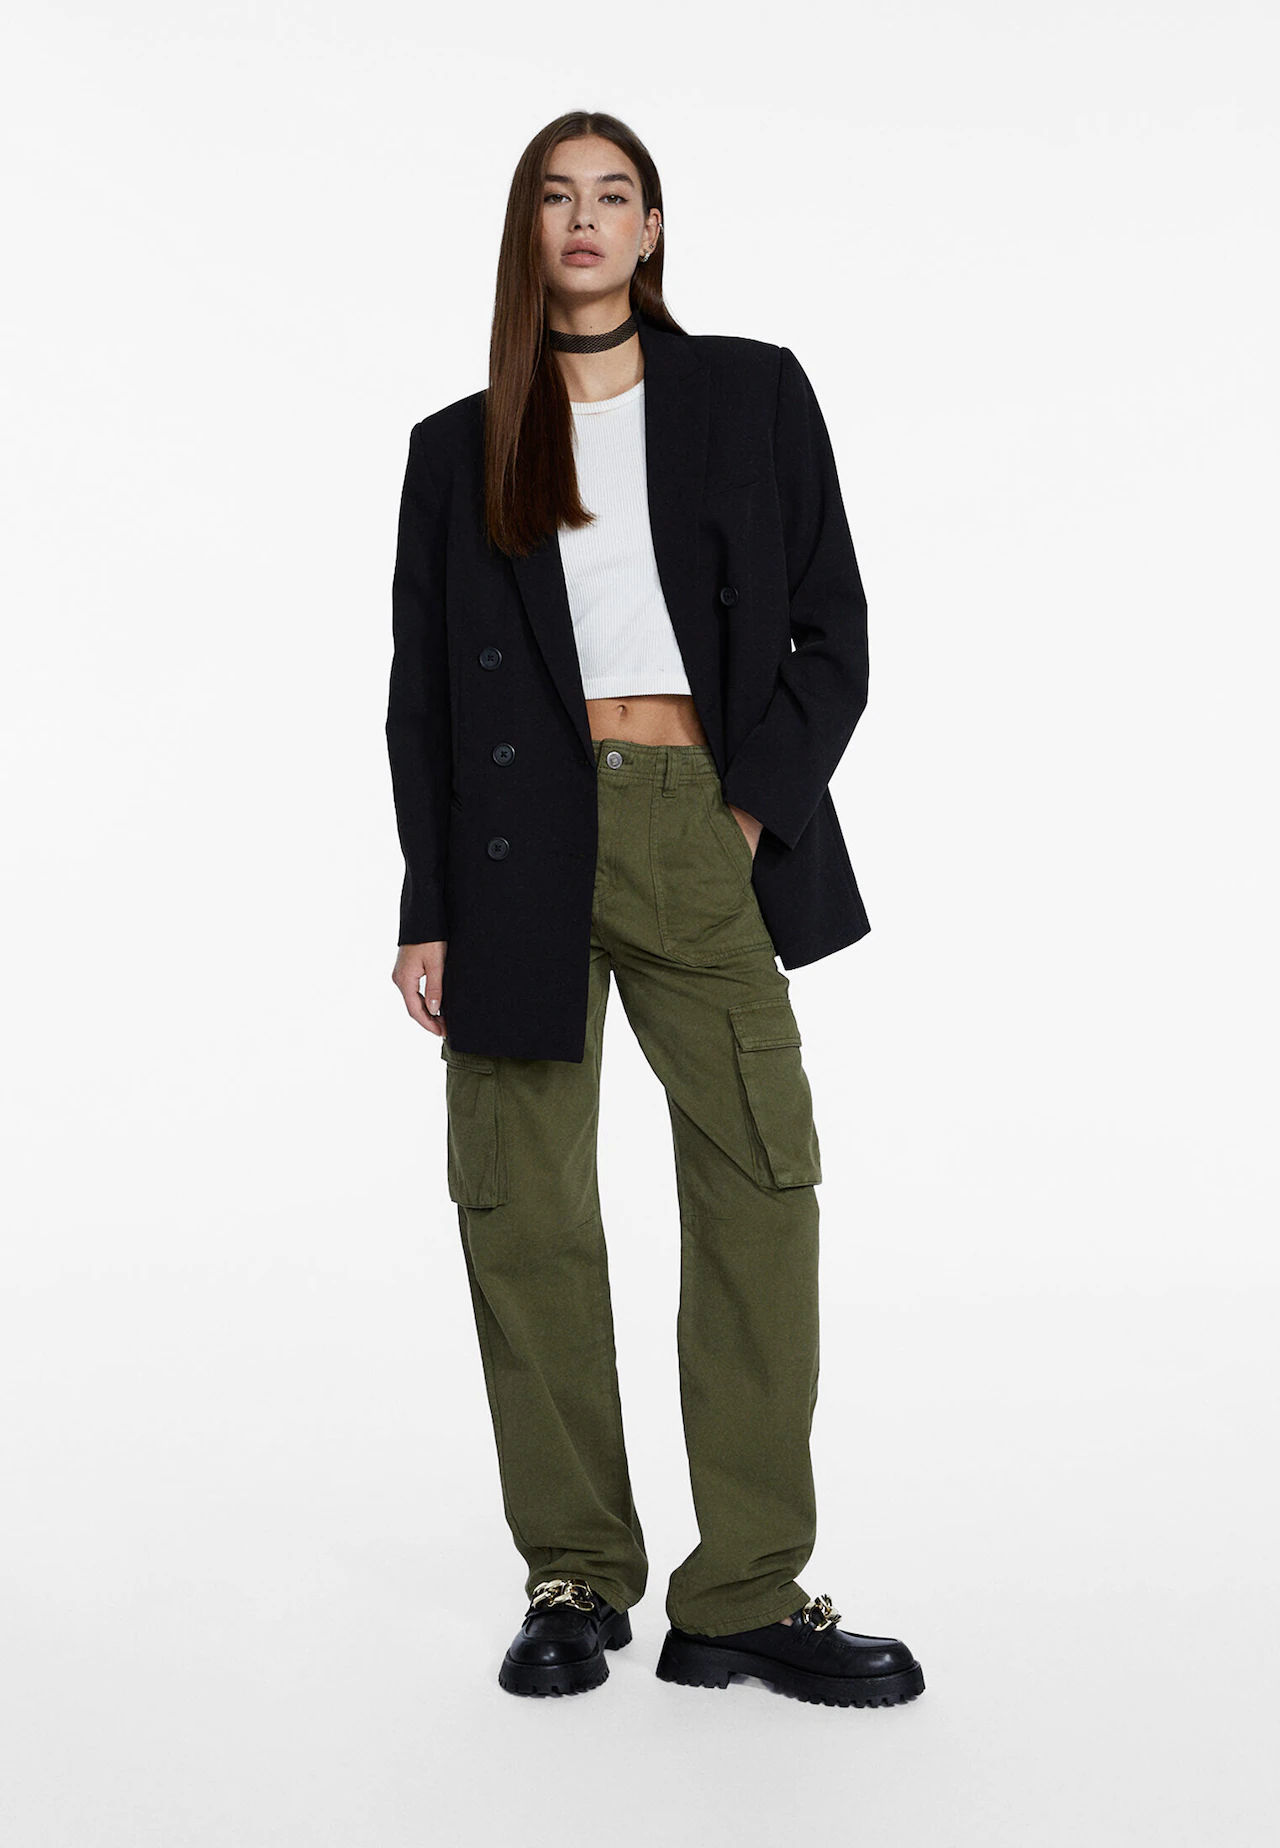 Relaxed fit cargo trousers - Women's fashion